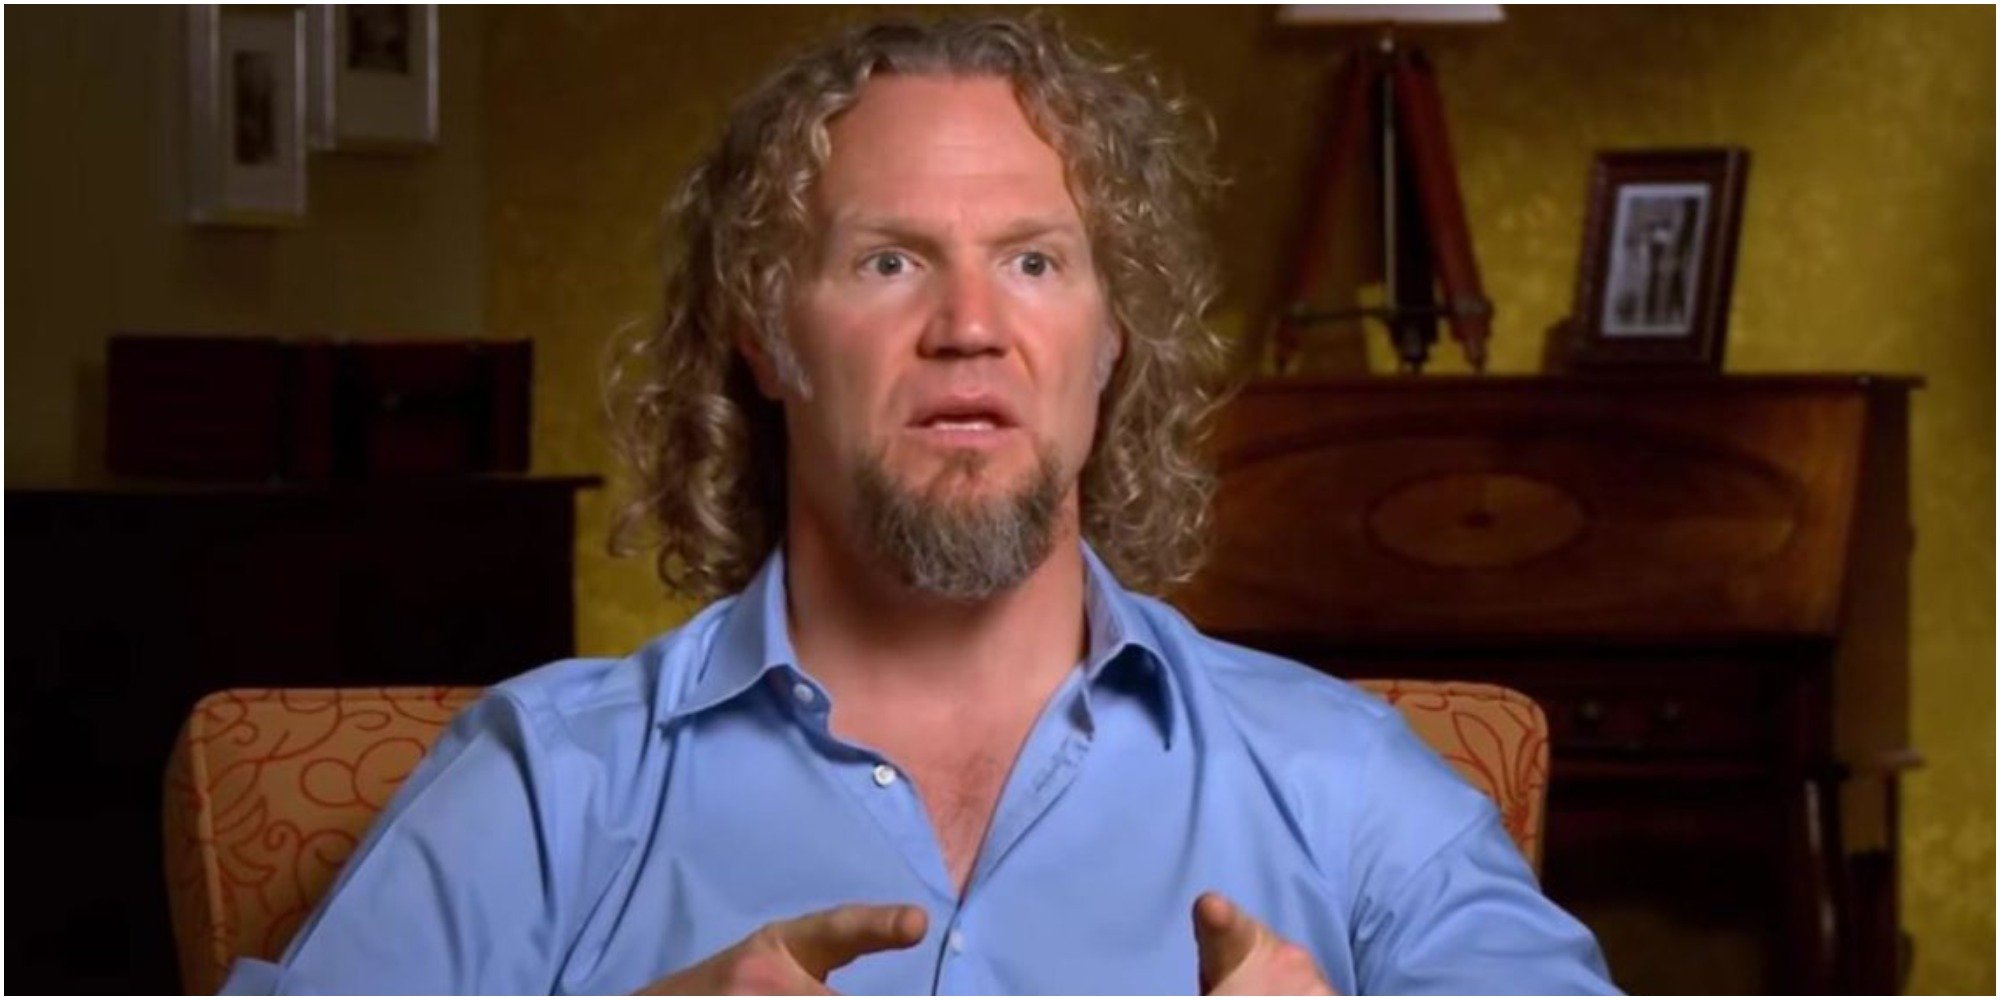 Kody Brown is seated in a confessional interview for "Sister Wives."